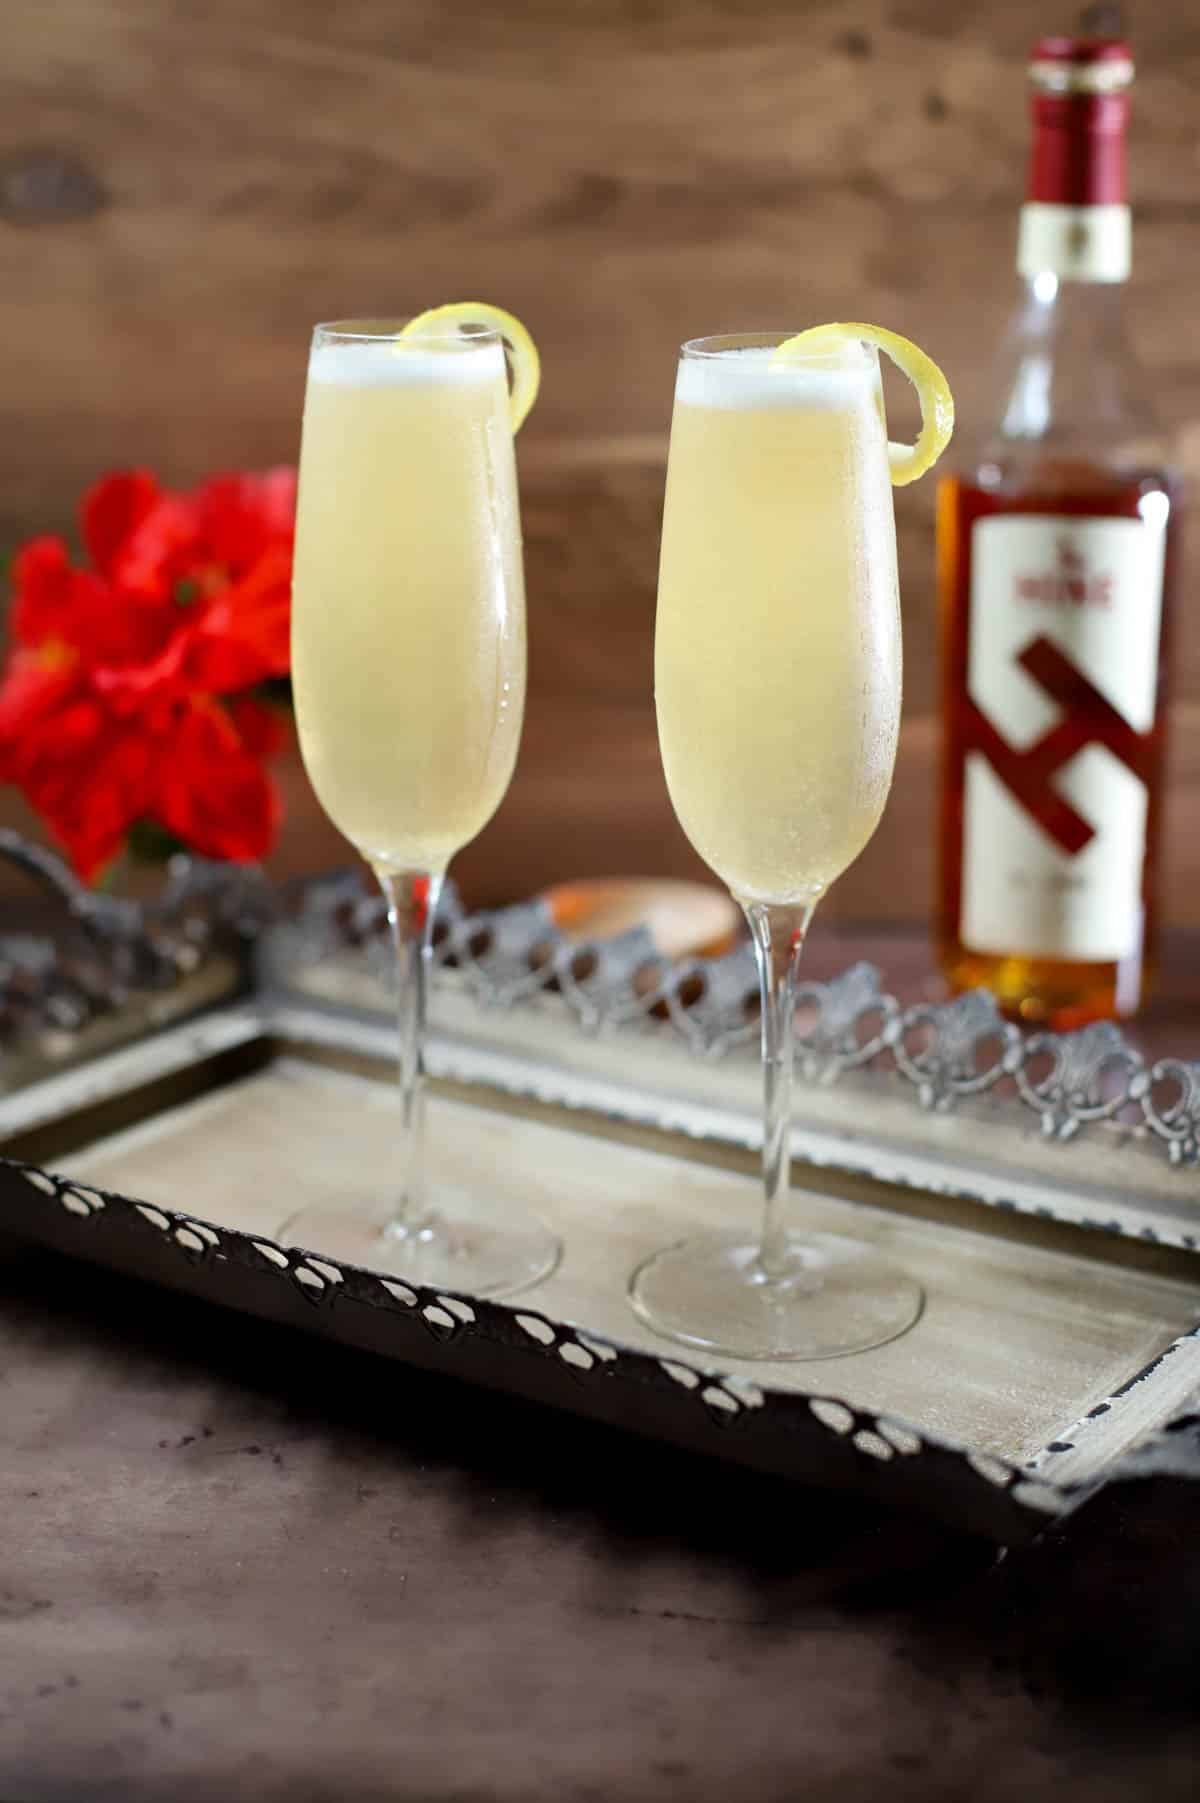 French 75 cocktail on a tray with flowers and bottle of cognac in back.